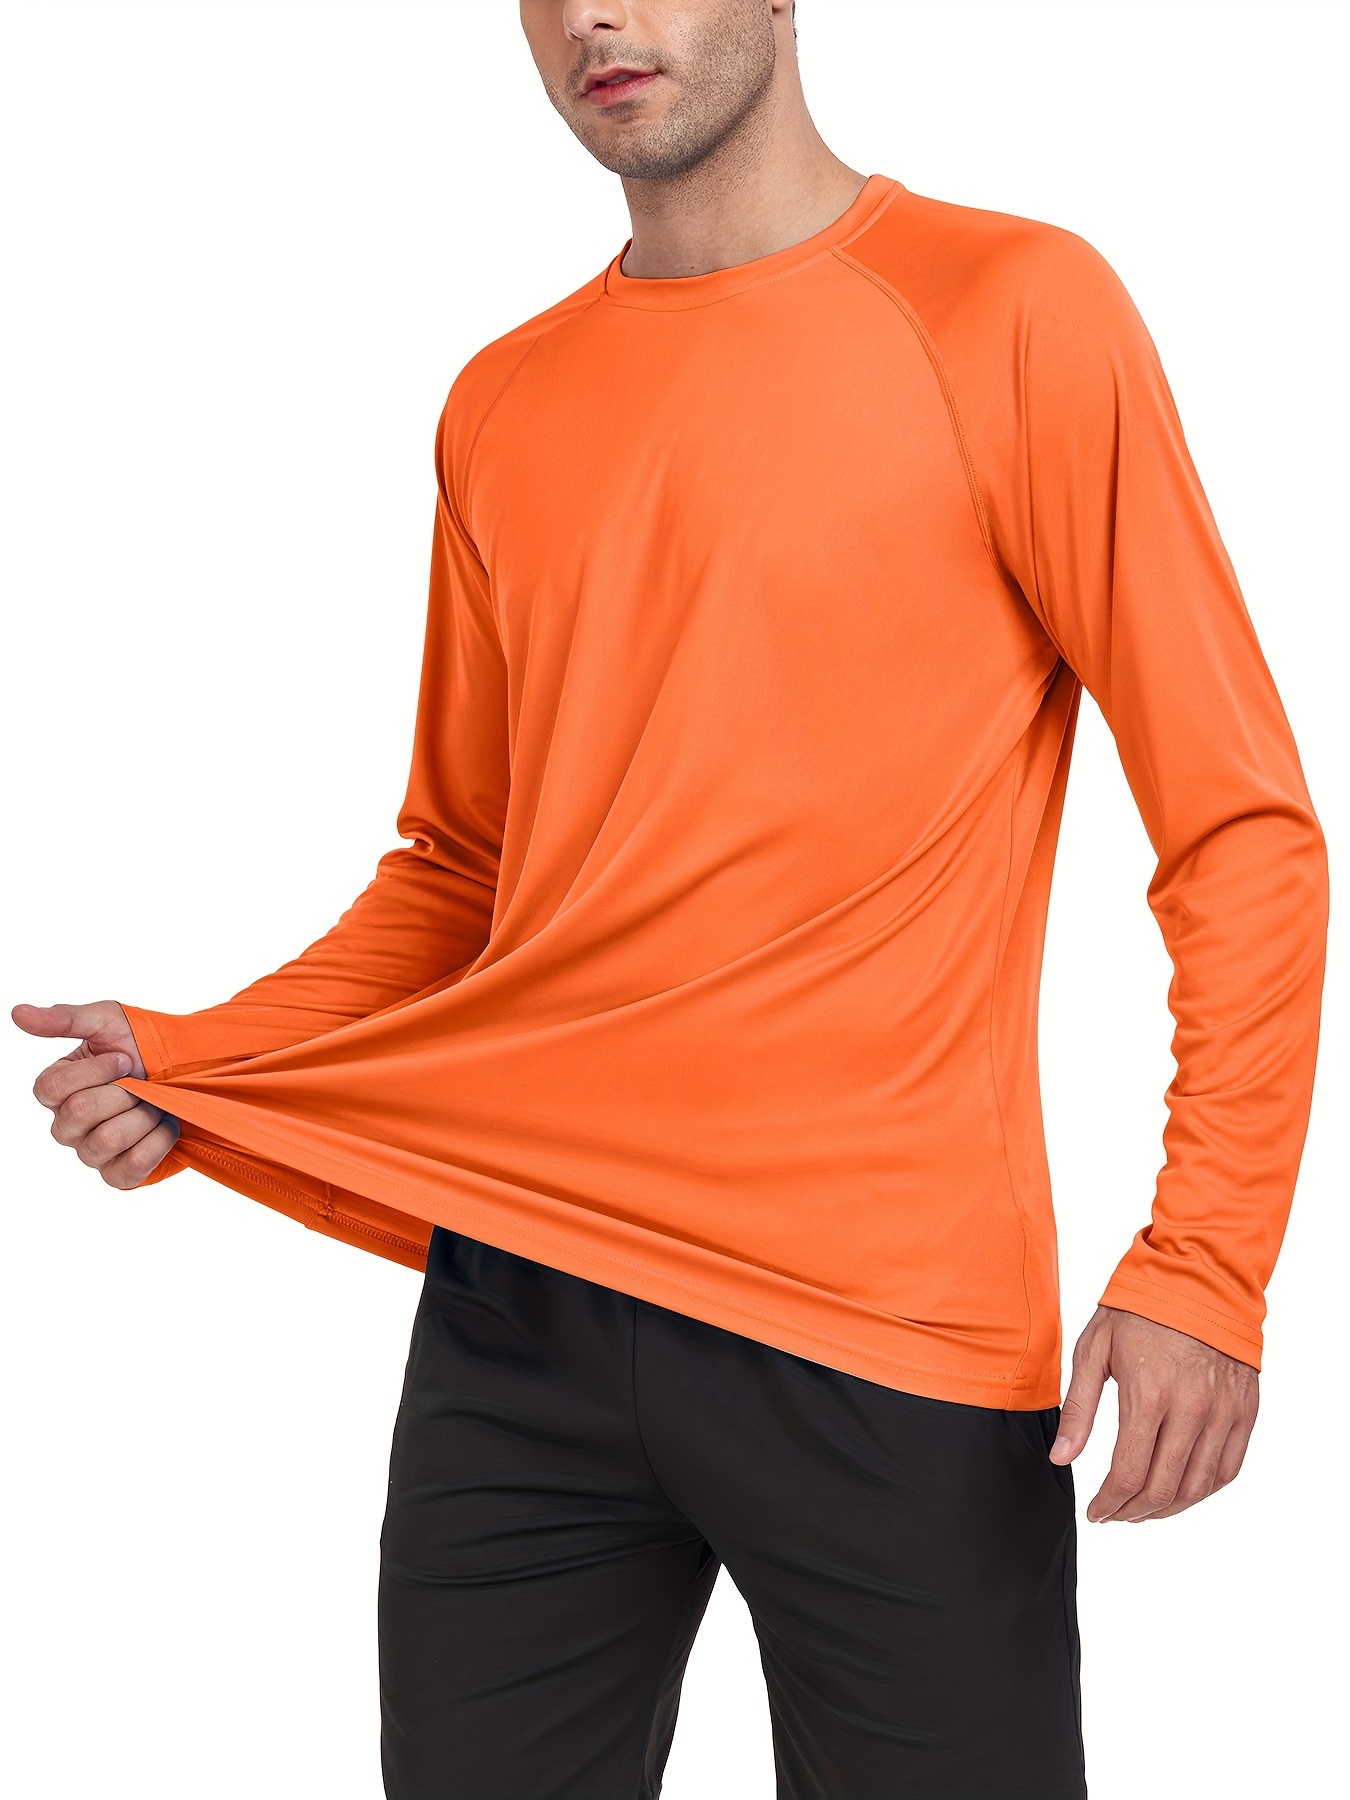 EXTERIOR T-SHIRT OFFERS COMFORT AND THERMAL CONTROL ON BELLY AND